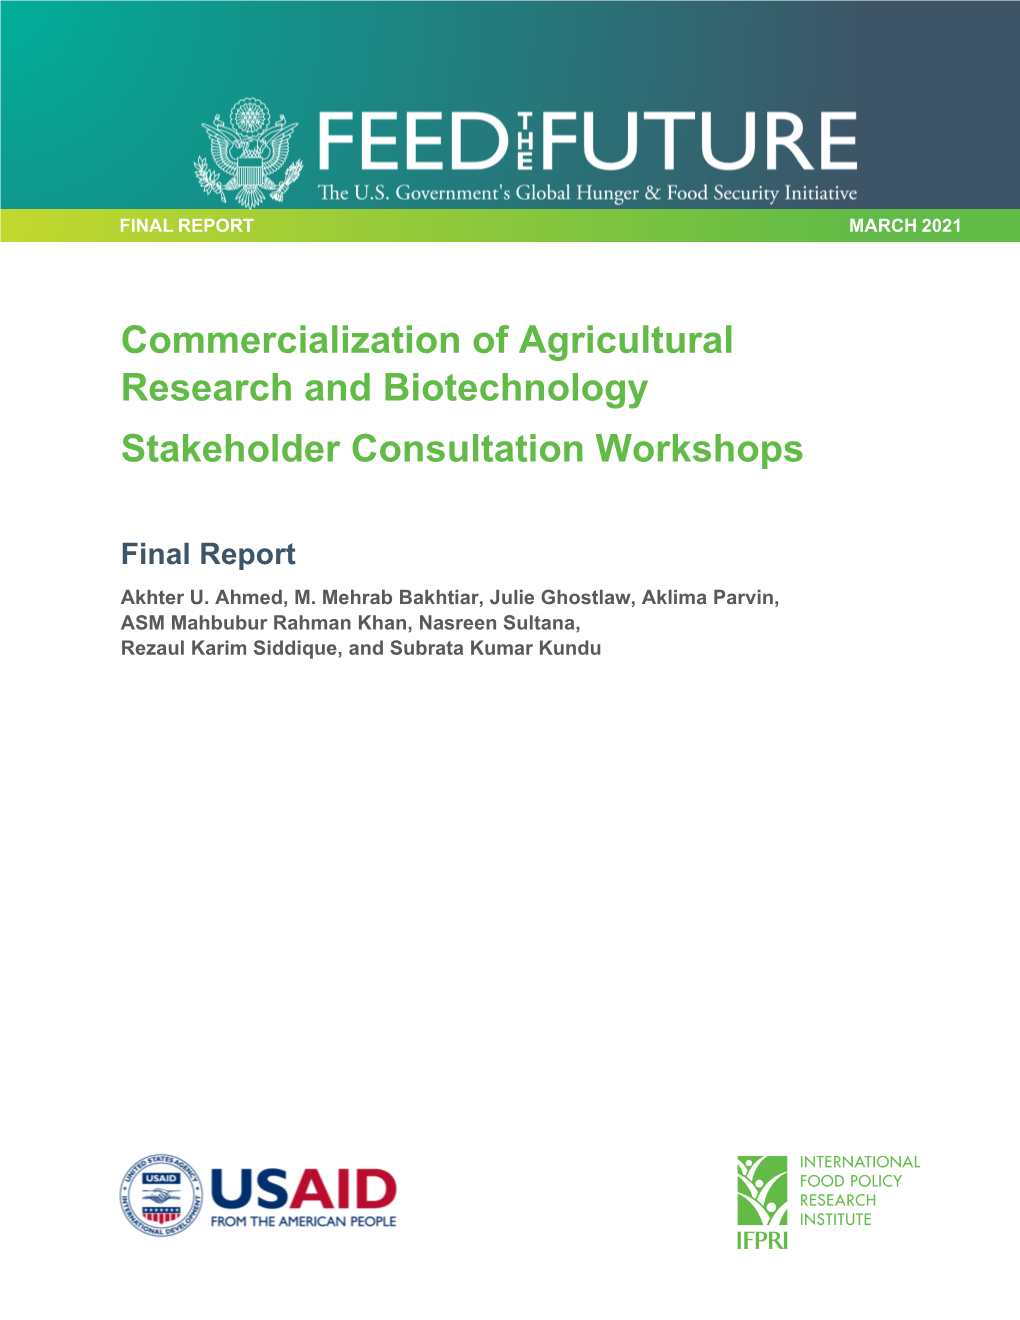 Commercialization of Agricultural Research and Biotechnology Stakeholder Consultation Workshops